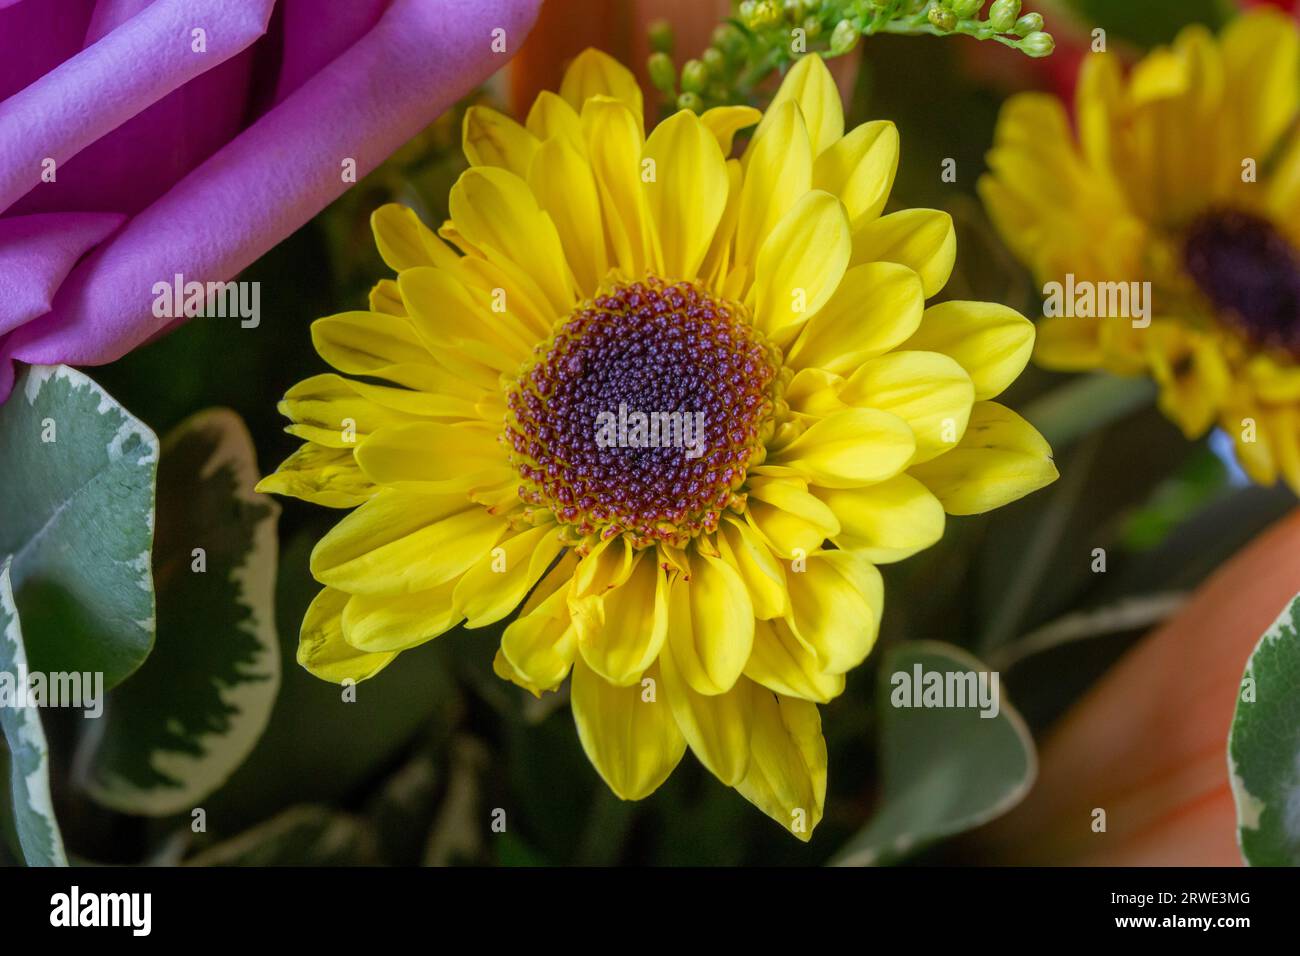 Macro texture background of fresh bright flowers in an indoor florist arrangement, featuring a yellow chrysanthemum Stock Photo